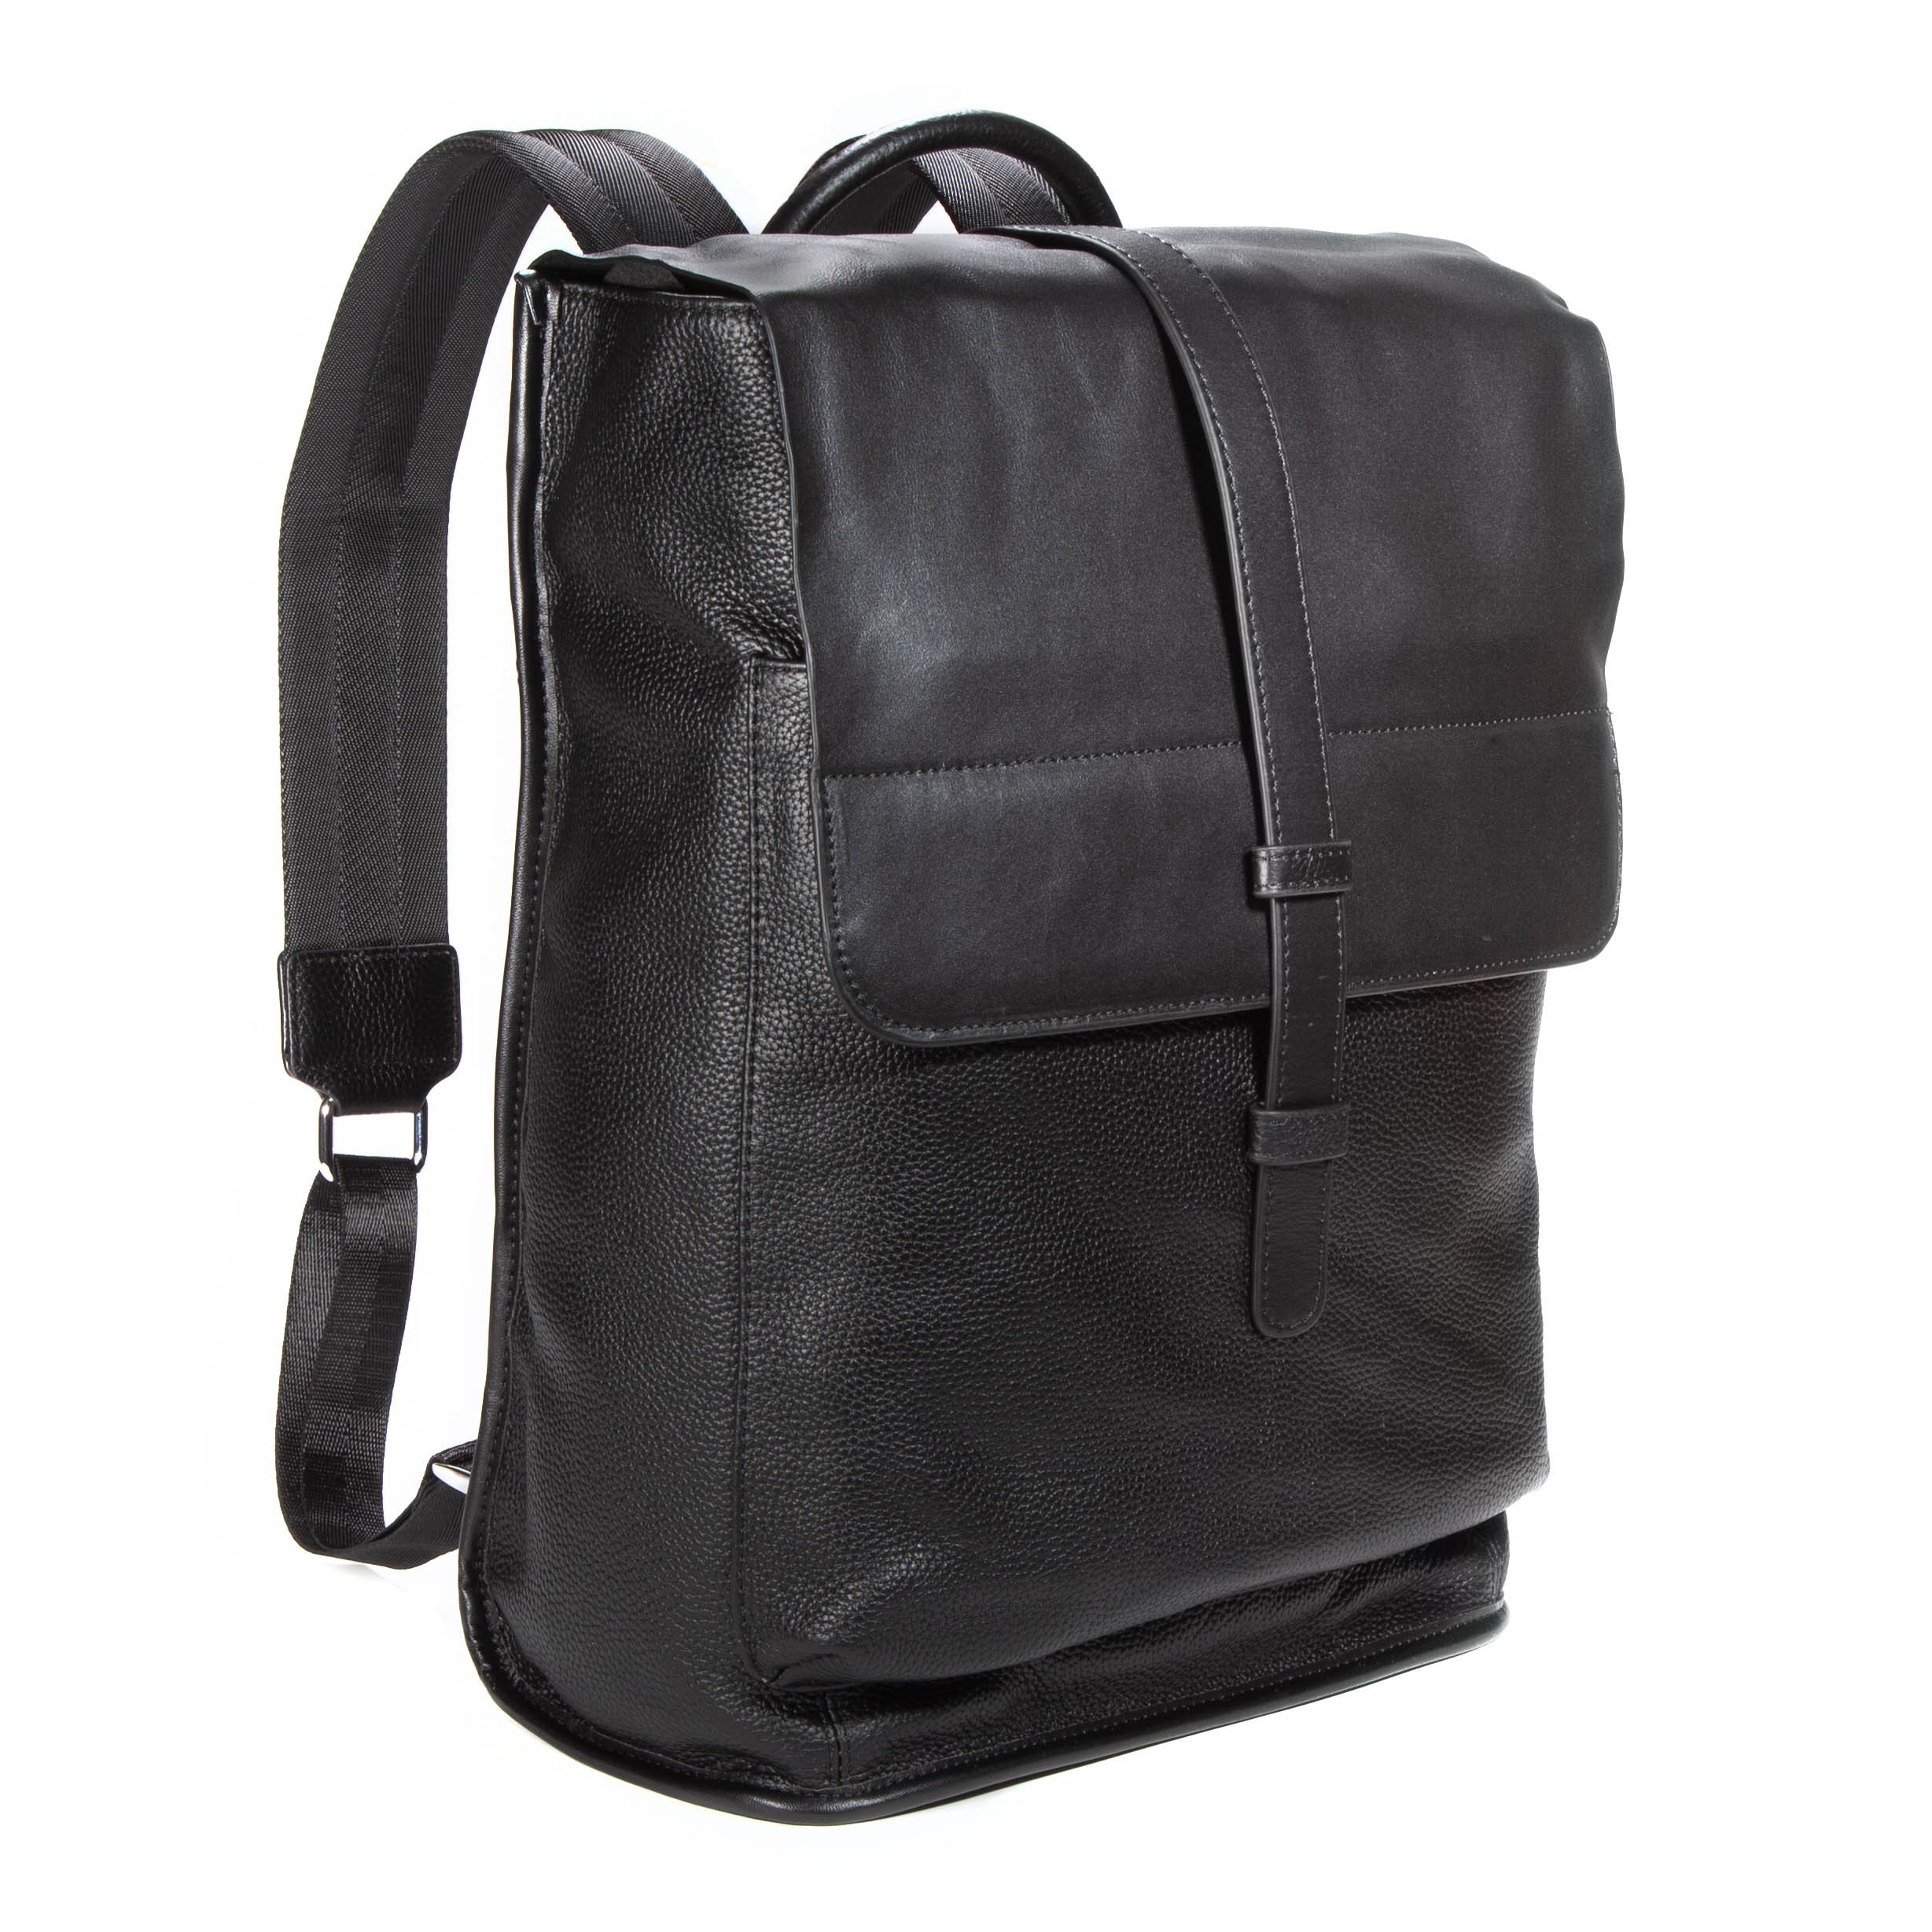 Falcon Leather Structured Backpack - FI6716 Black - Backpack - Falcon